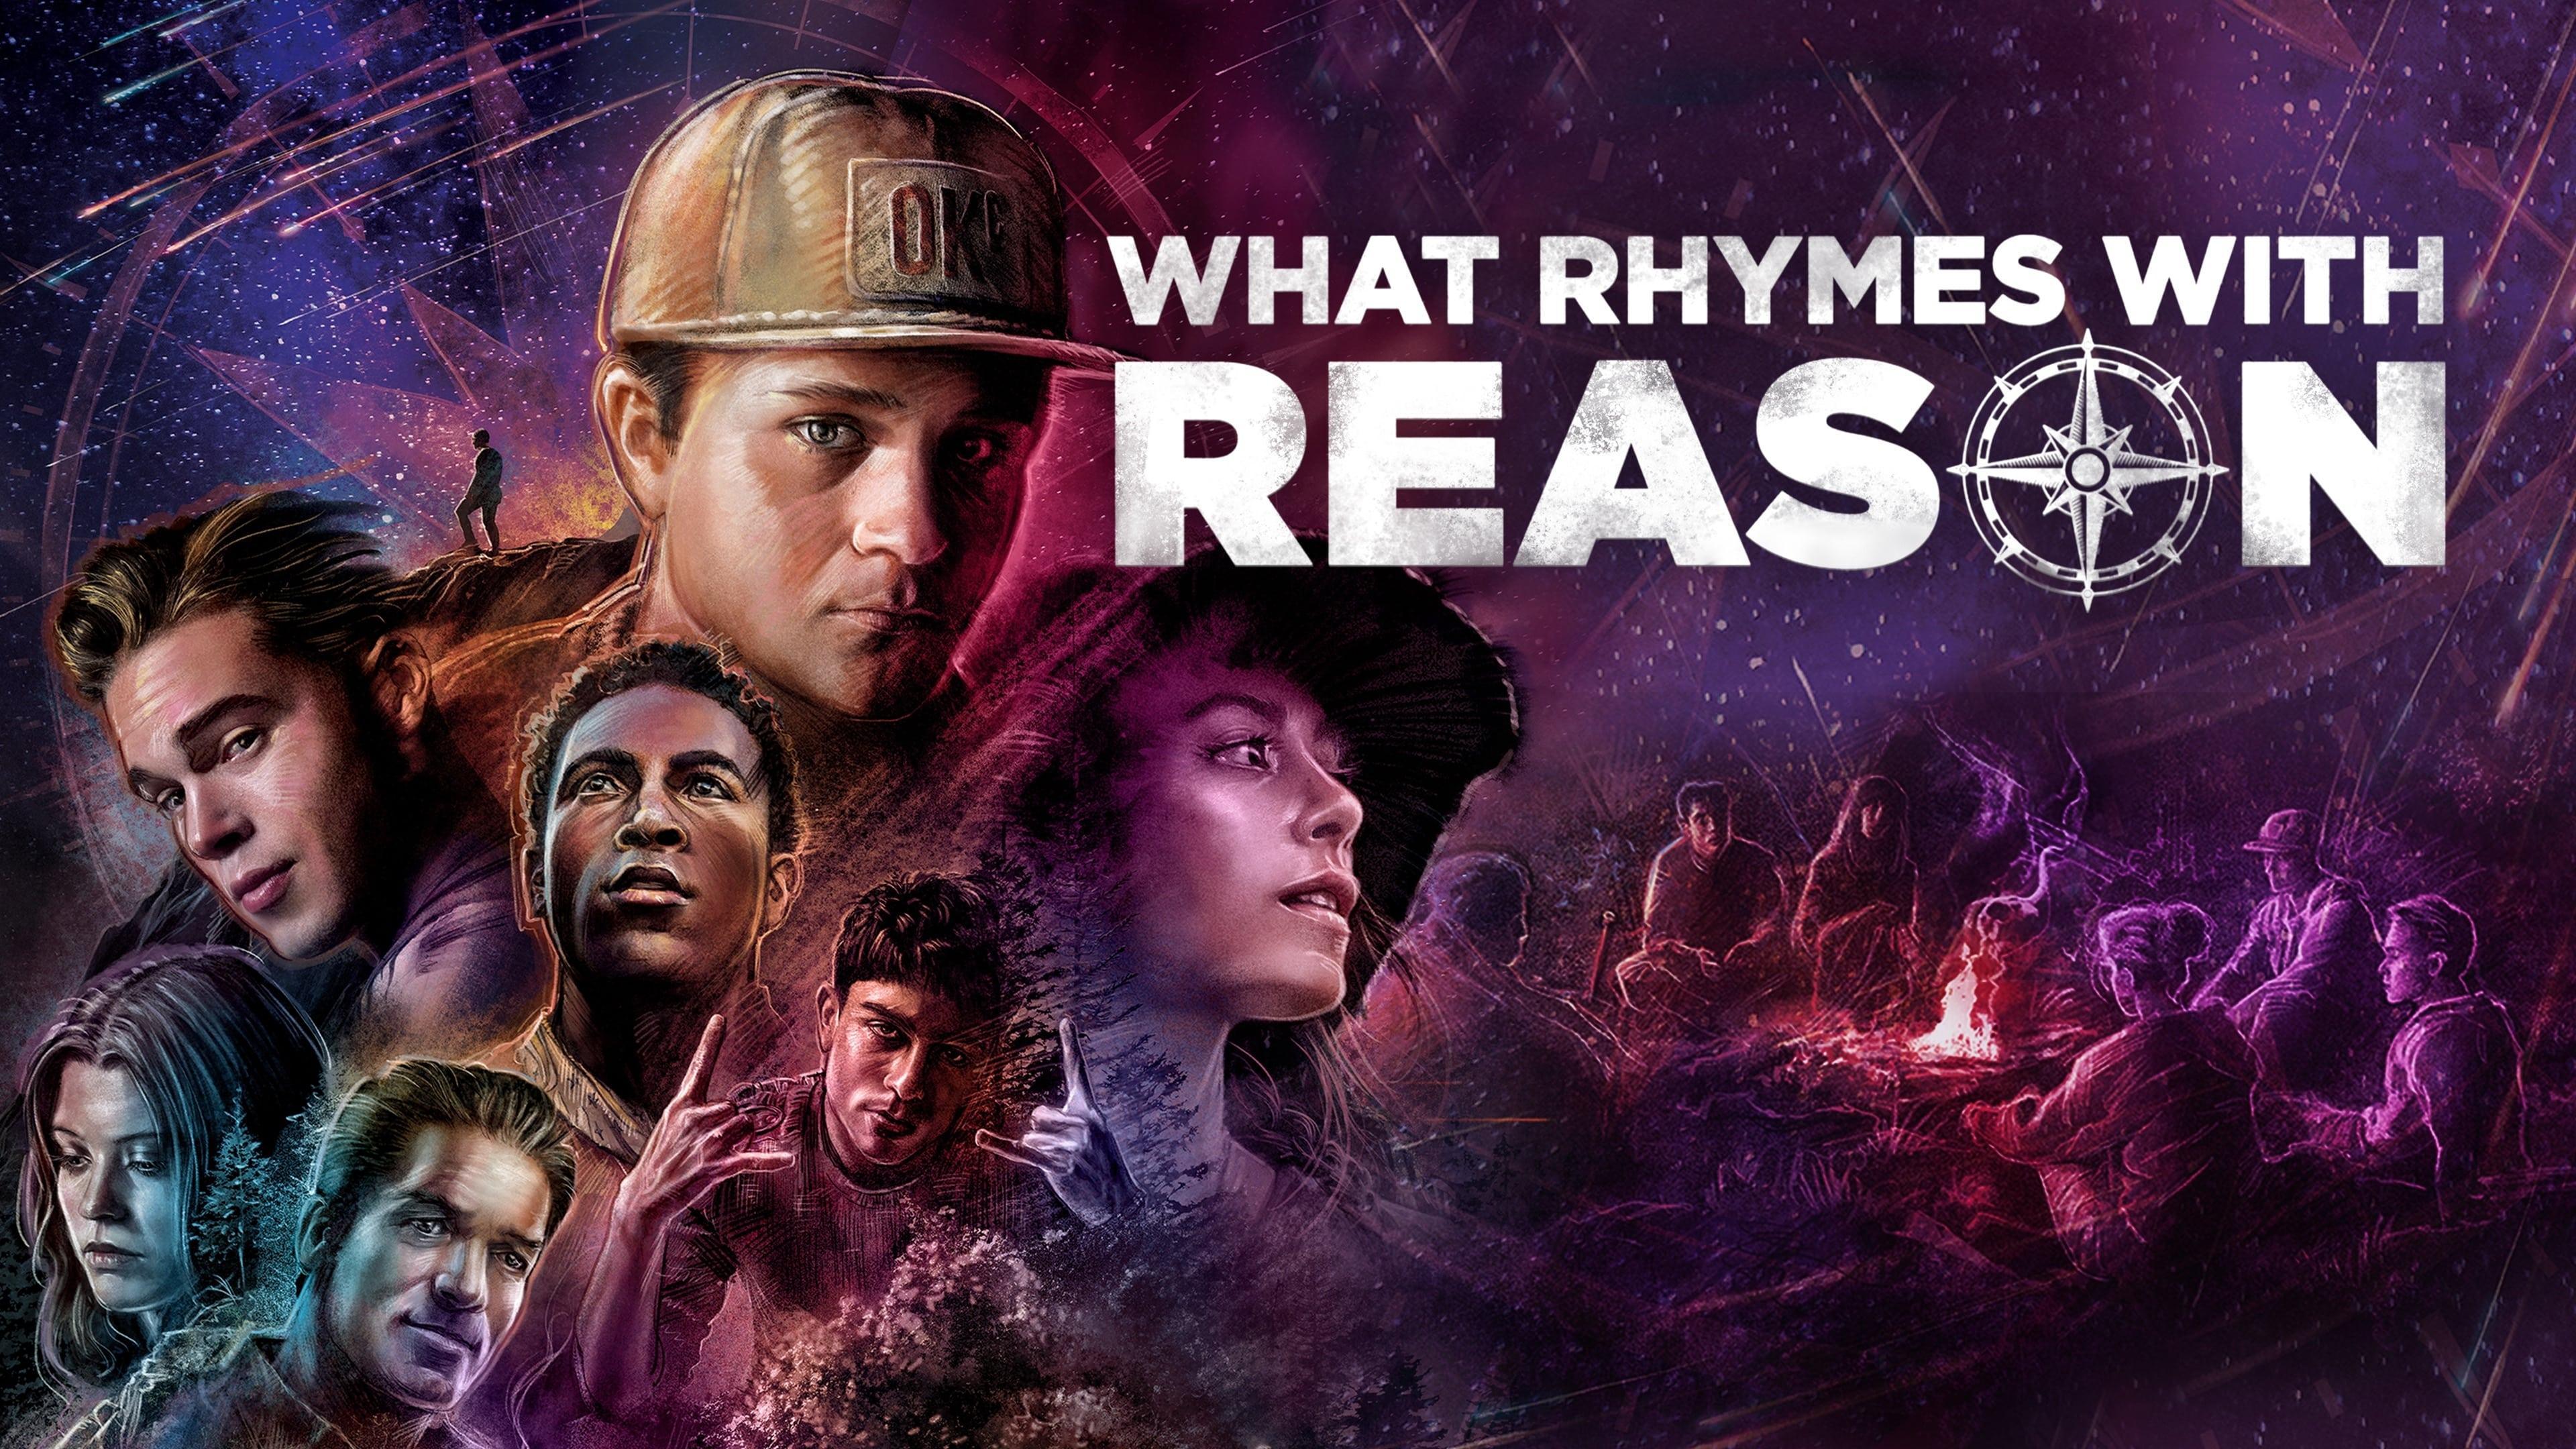 What Rhymes with Reason backdrop